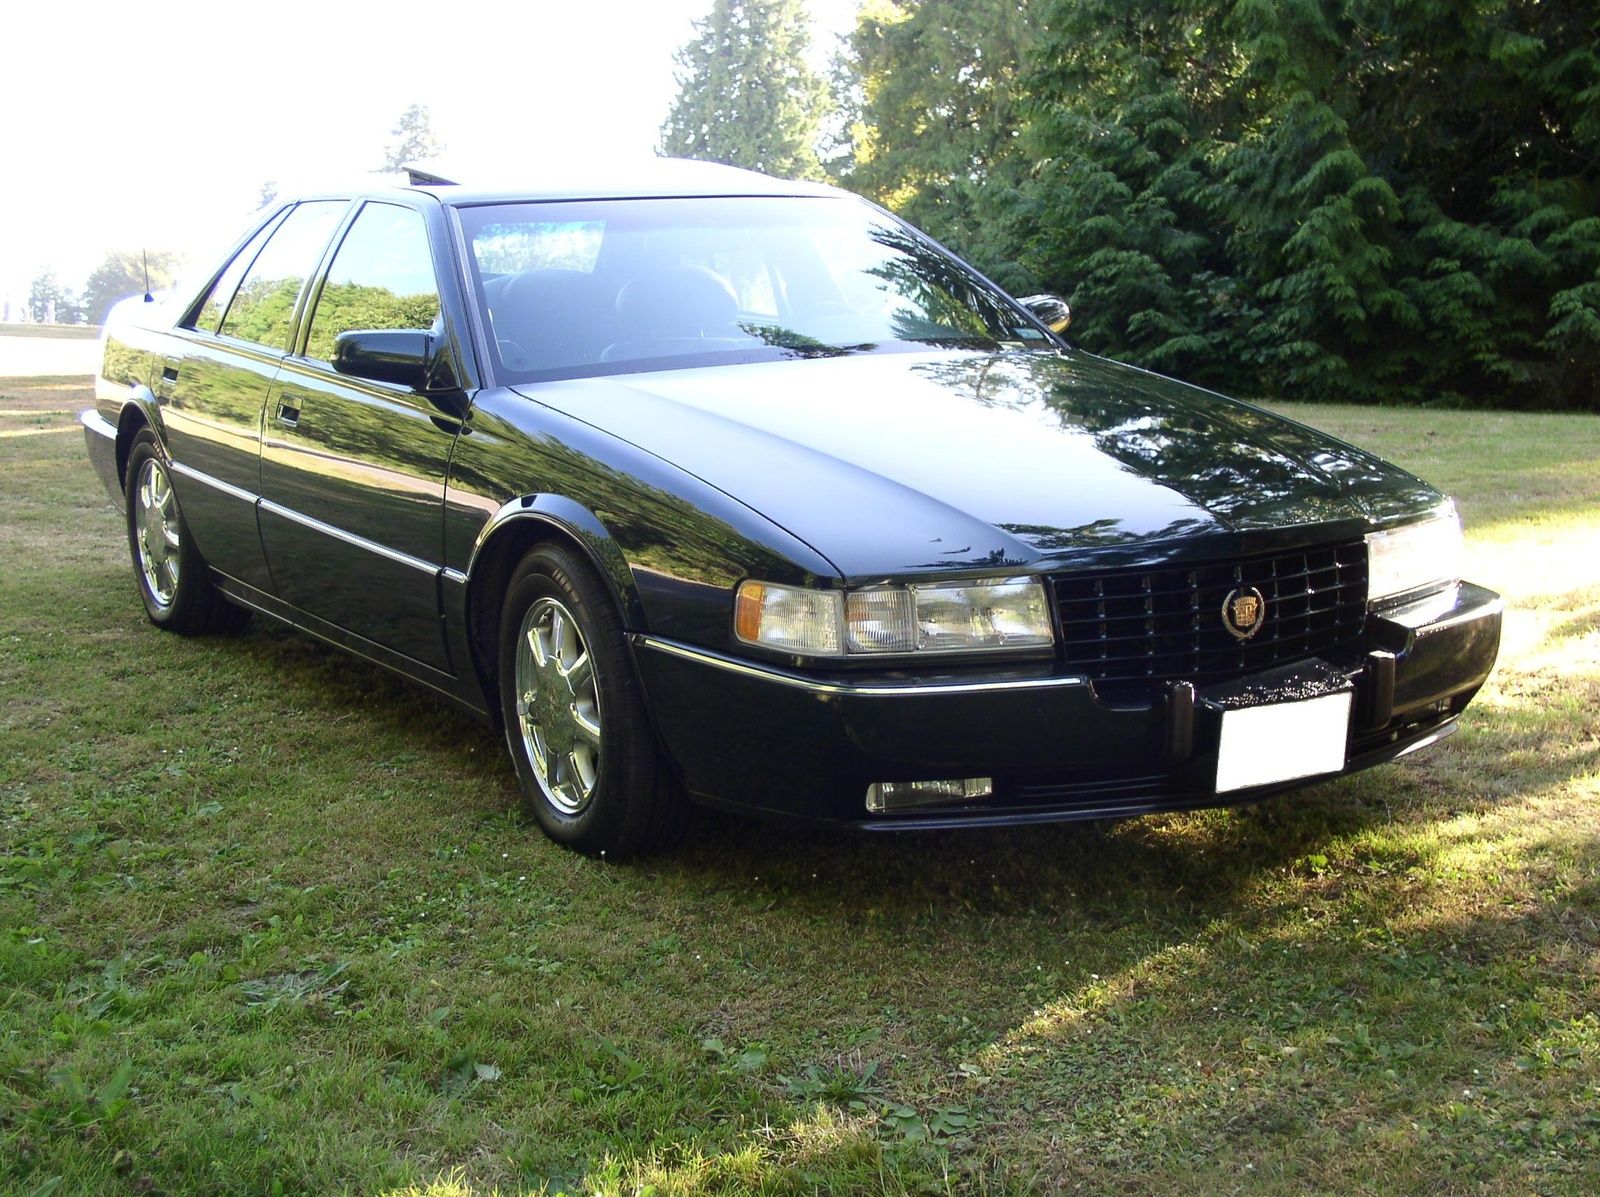 1997-cadillac-seville-sts-0-60-times-top-speed-specs-quarter-mile